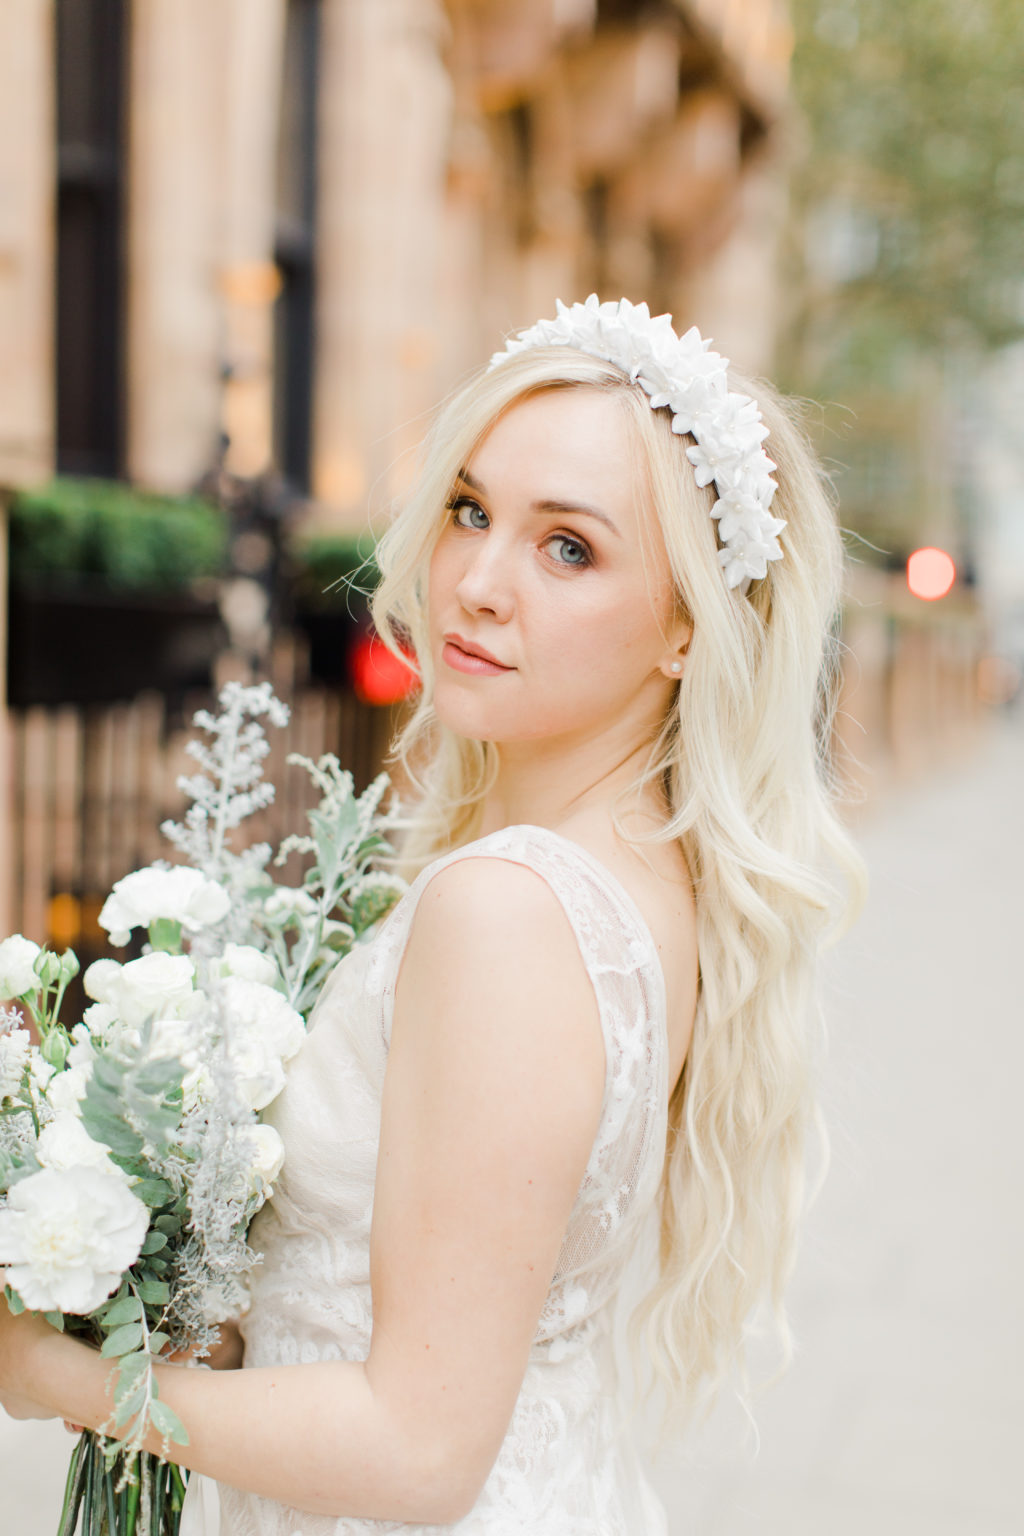 Our Favourite Bridal Head Bands Inspired by Amanda Gorman's Inauguration Look